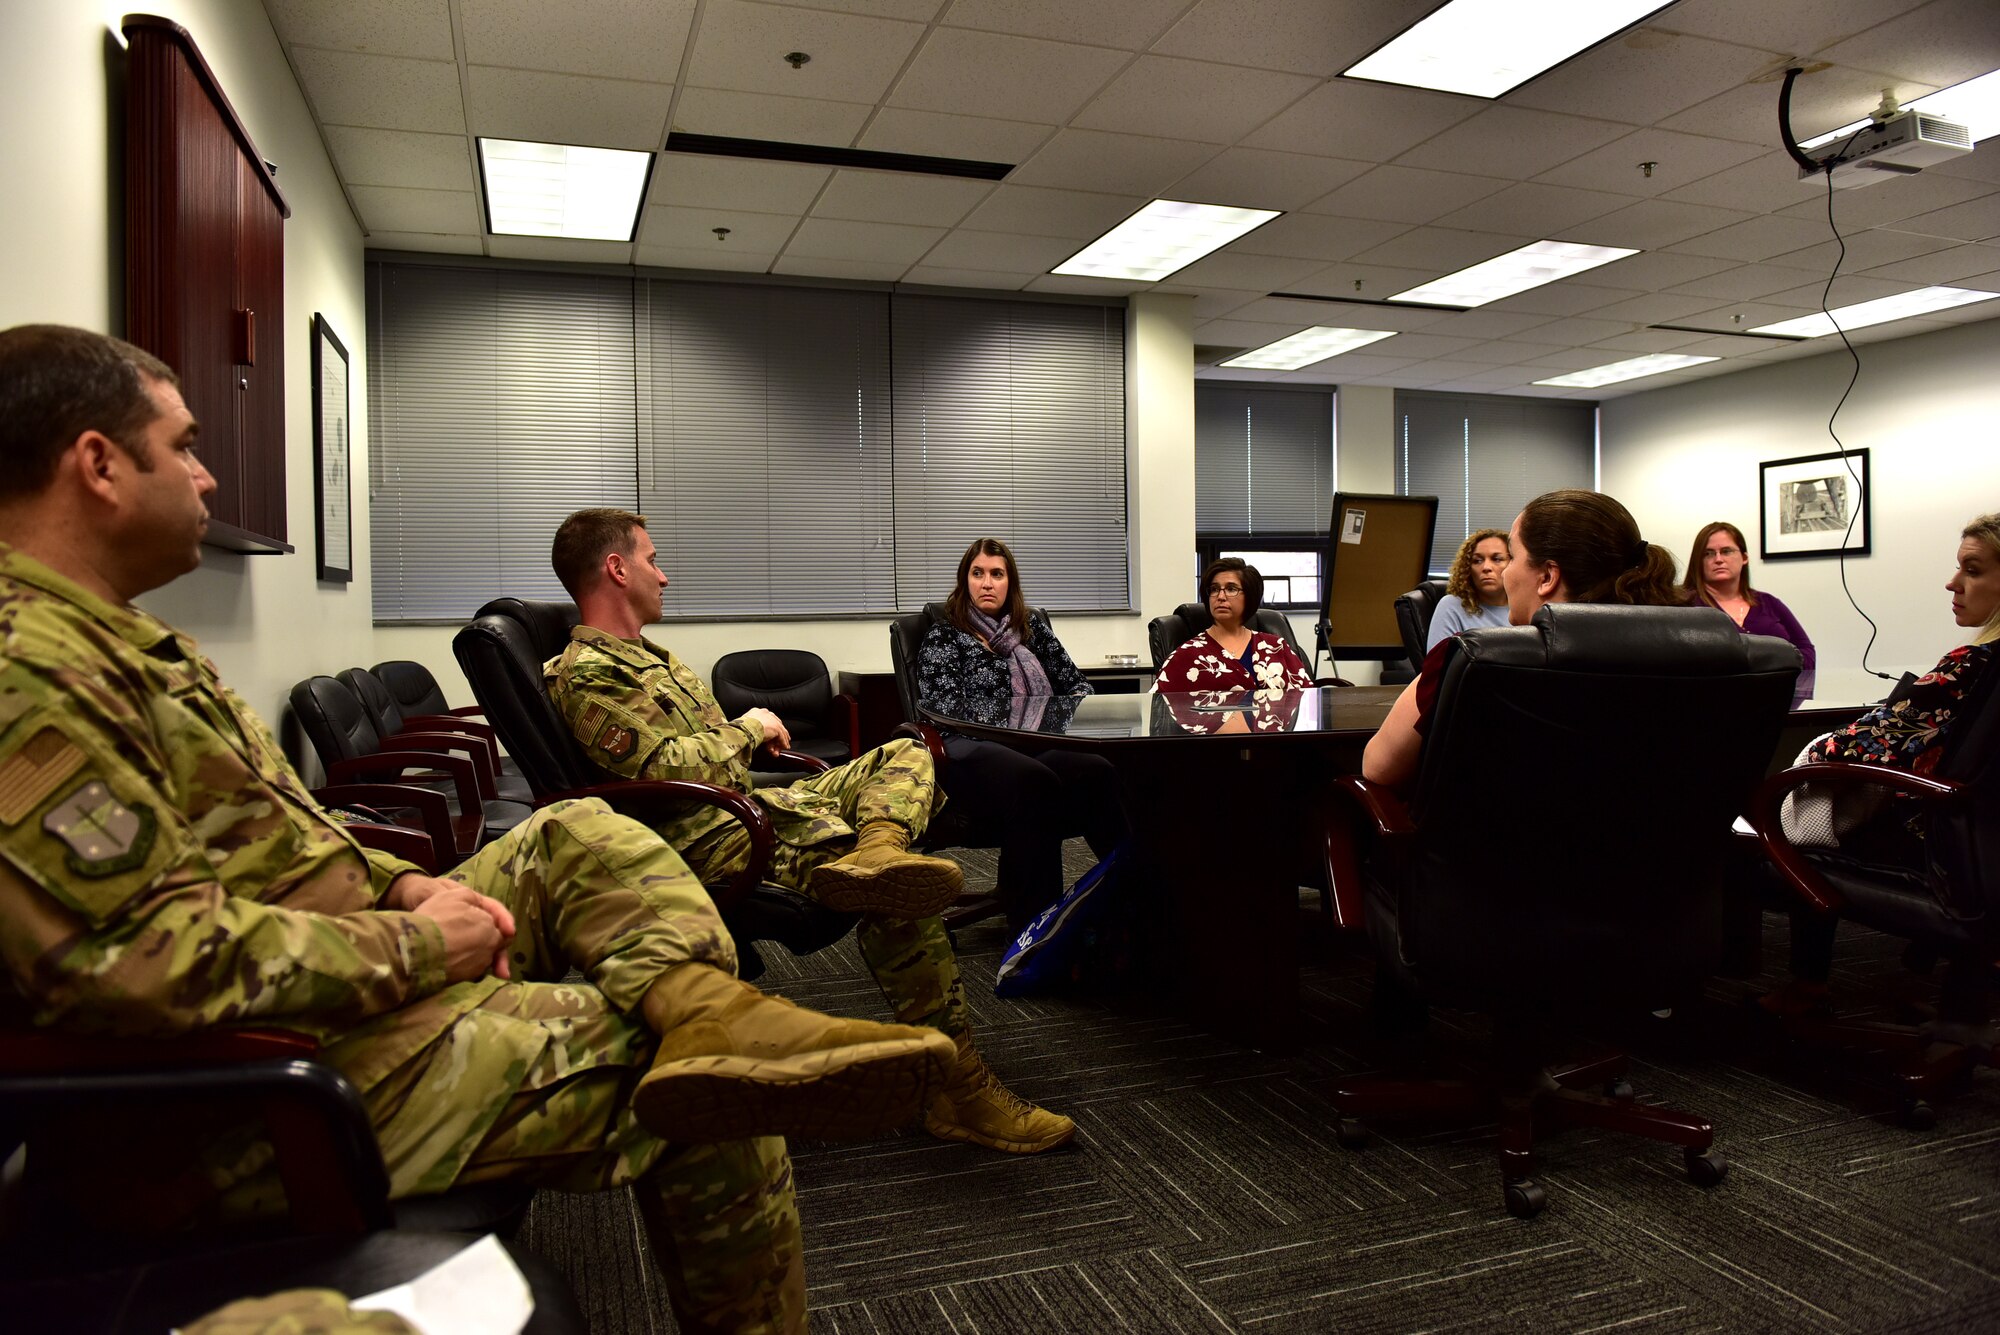 Individuals recieve a briefing around a round table in a biege room. A man in uniform is at the front of the table addressing people in civilian clothing.